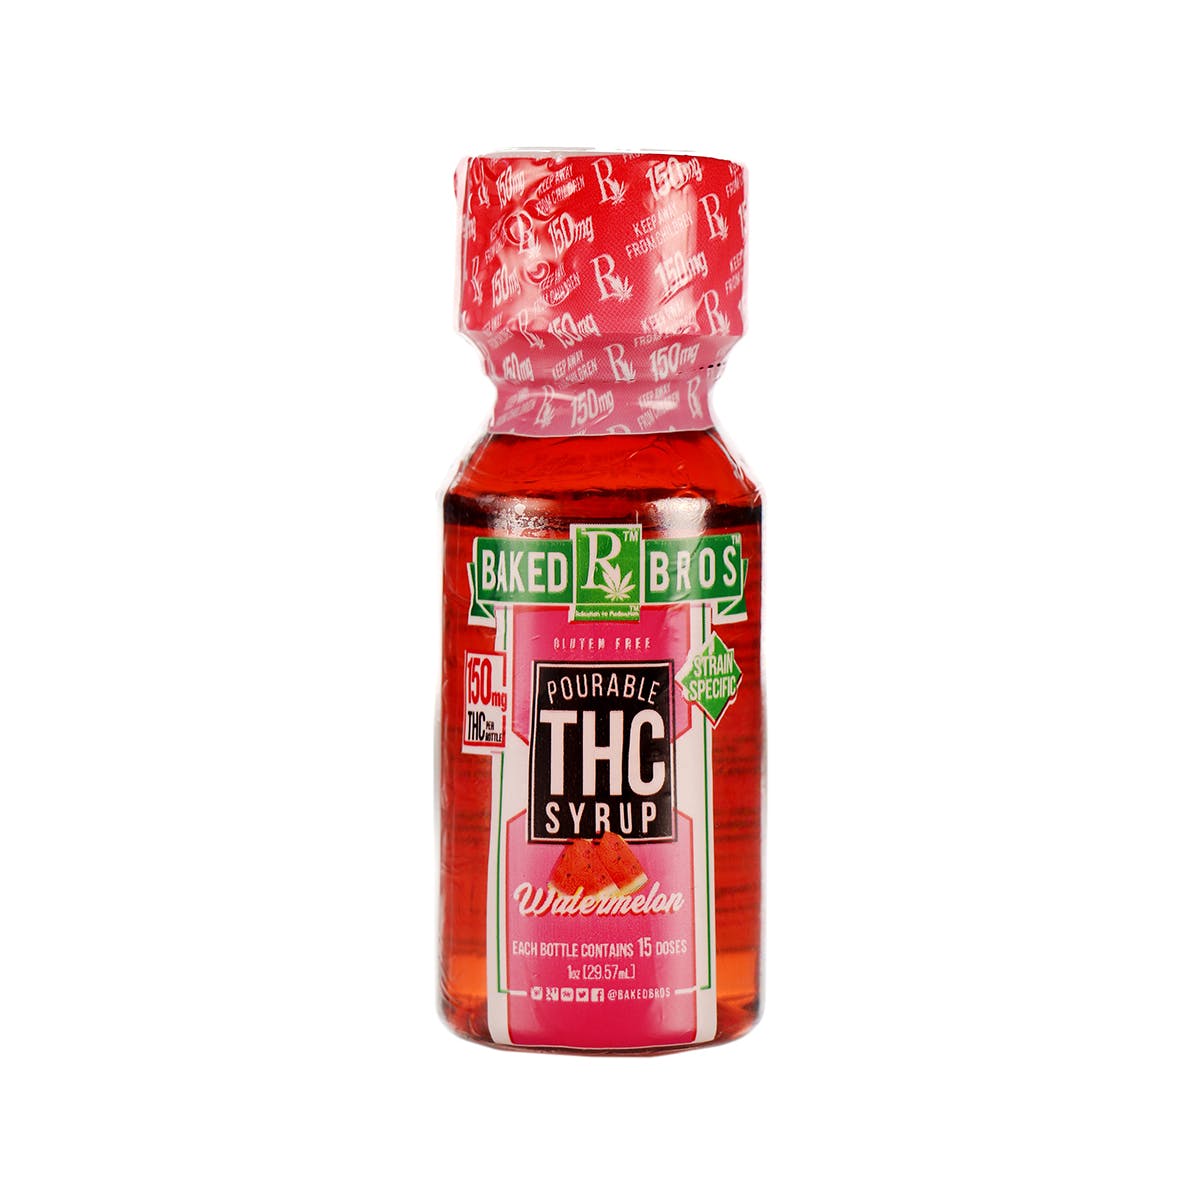 THC Syrup Watermelon 150mg